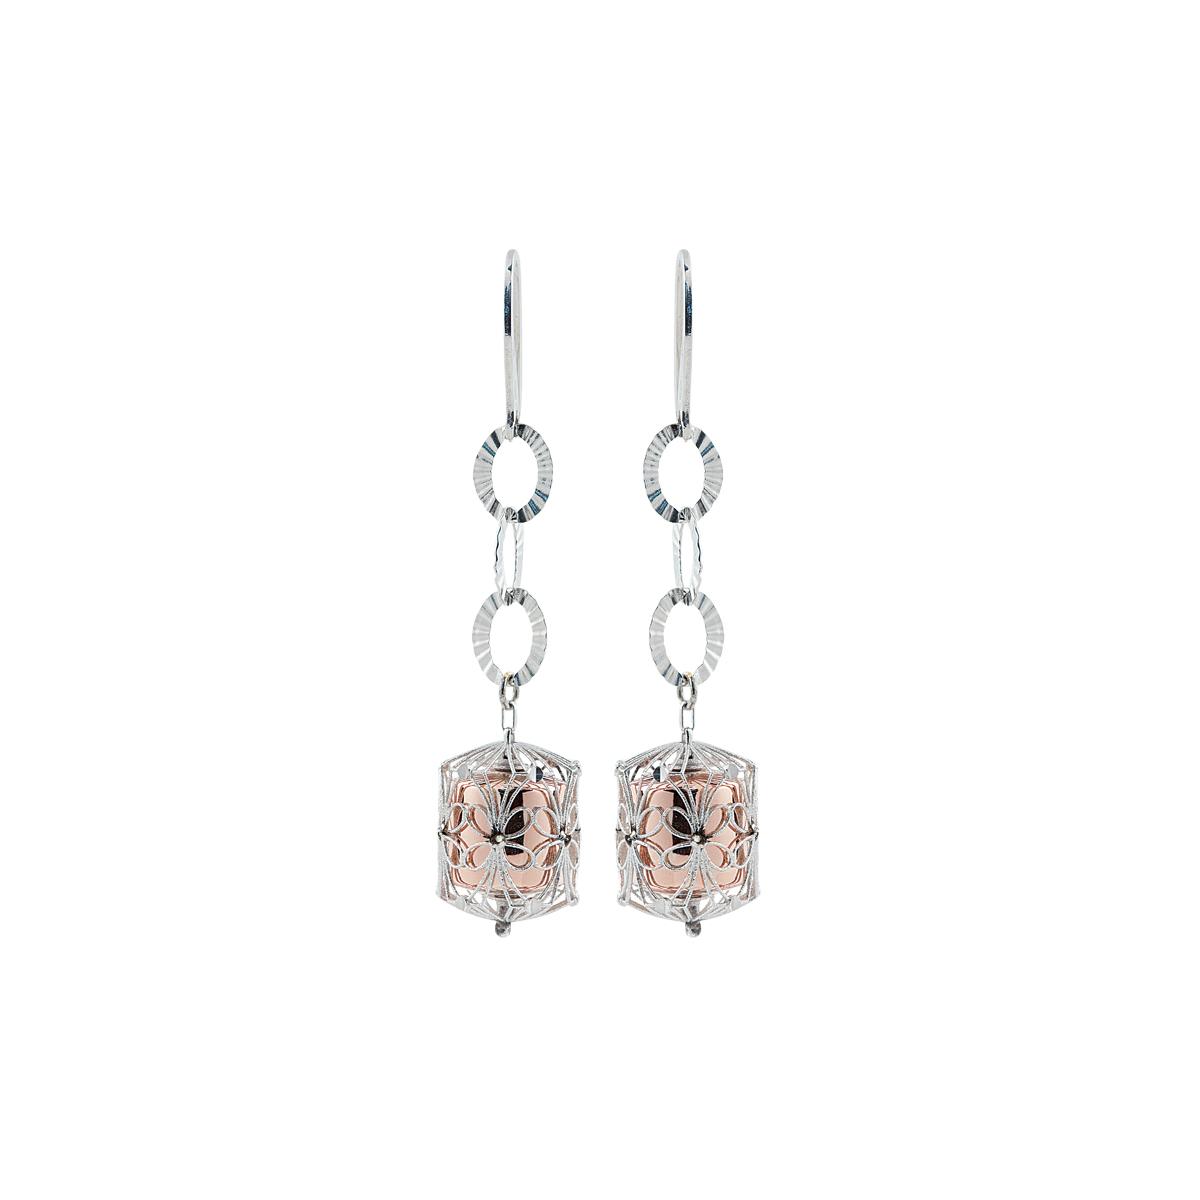 Earrings in 925 silver rhodium-plated and rose gold-plated - ZOR1089-LH